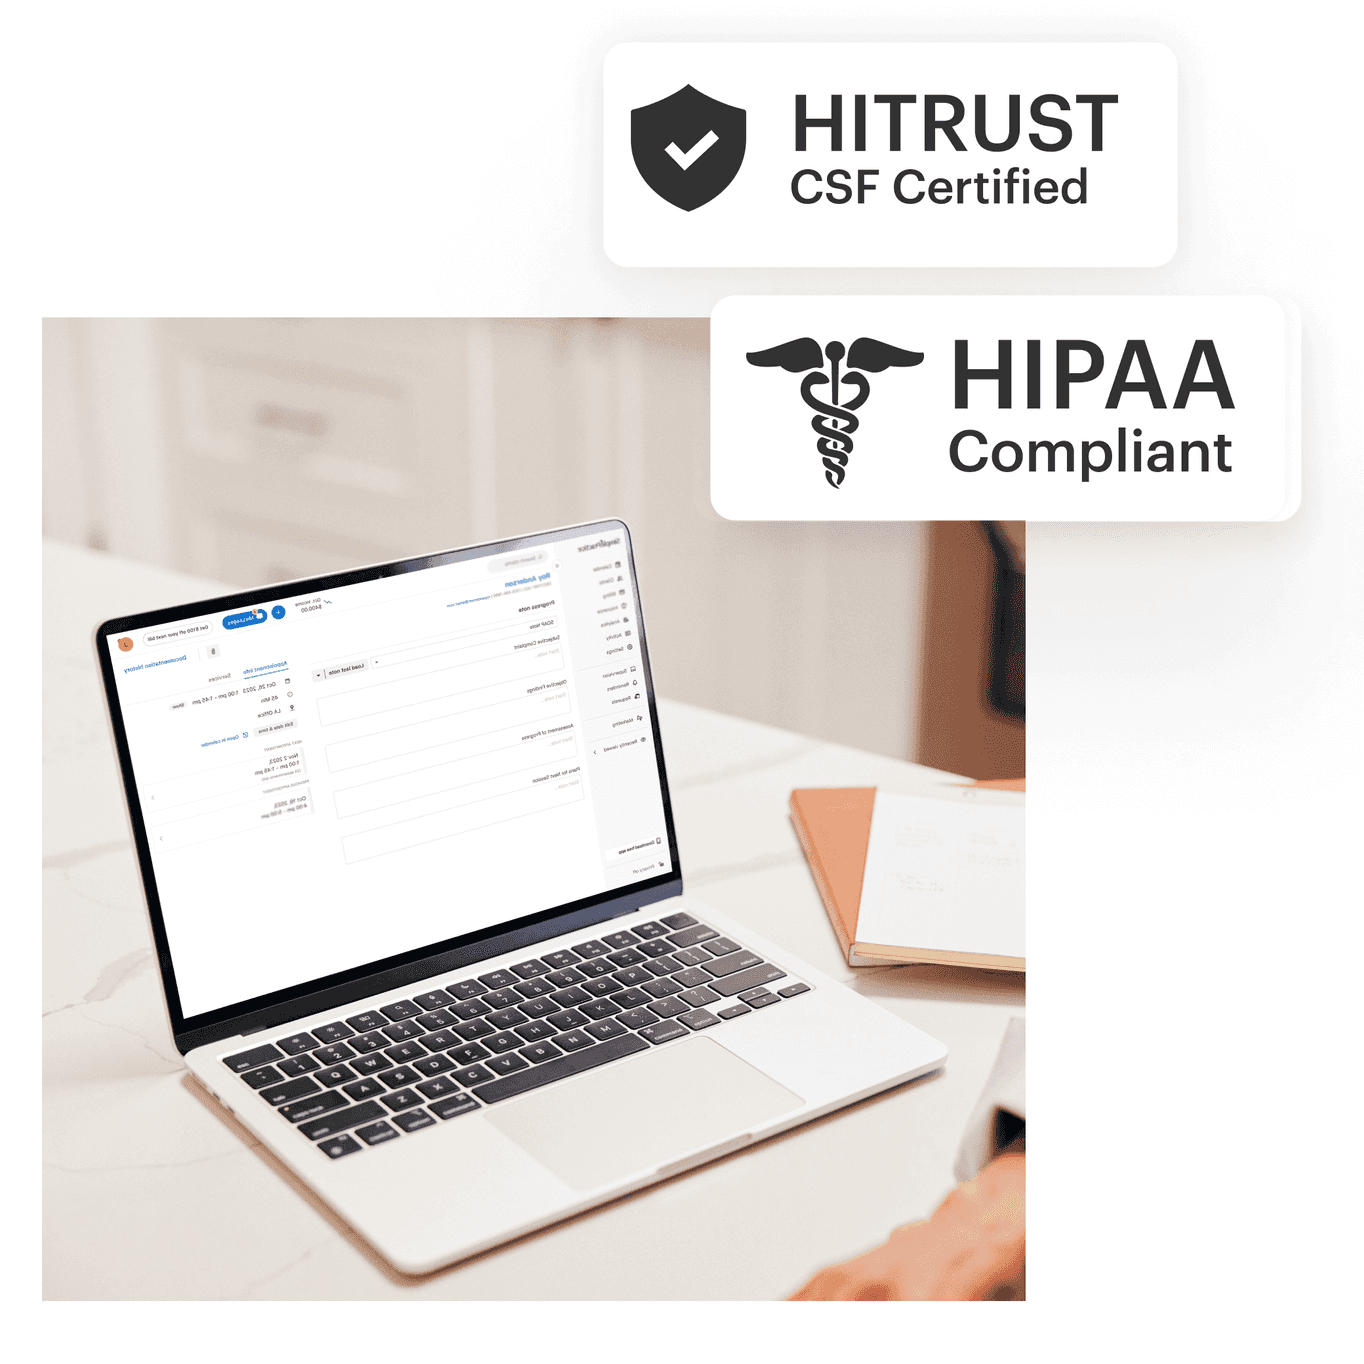 Therapist using SimplePractice on a laptop, overlaid with logos that say "HITRUST CSF Certified" and "HIPAA Compliant"